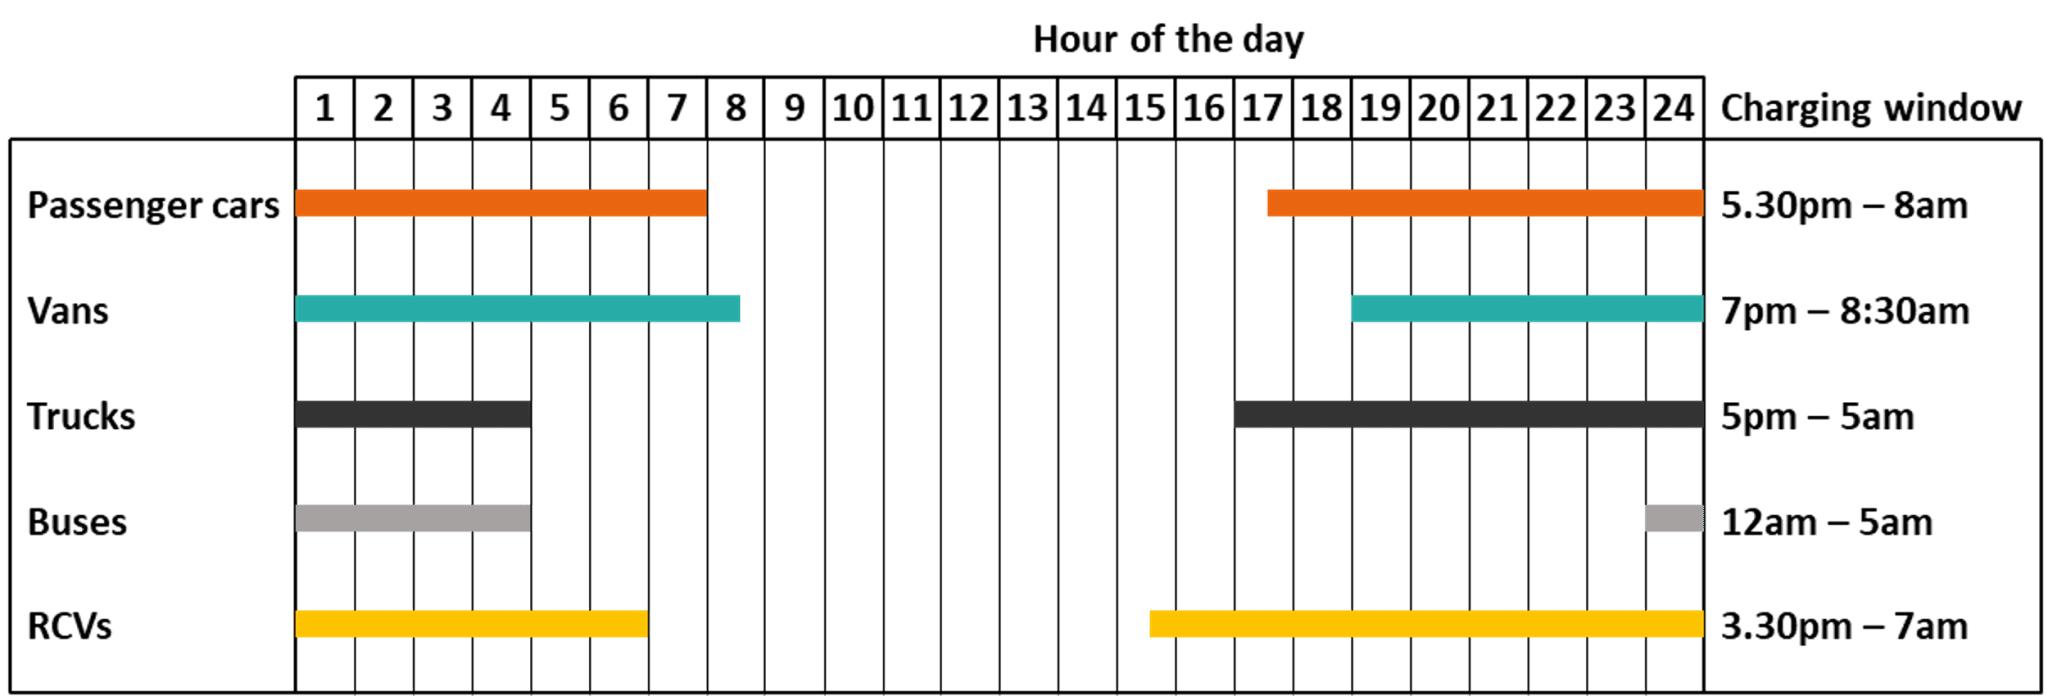 A gantt chart showing the charging windows of passenger cars, vans, trucks, buses and refuse collection vehicles. The gantt chart indicates the hour whereby the vehicle is plugged in and out during a typical day of use. Passenger cars have a charging window between 5:30pm to 8am. Vans have a charging window between 6pm to 8:30am. Trucks have a charging window between 5pm to 5am. Buses have a charging window between midnight to 5am. Refuse collection vehicles have a charging window between 3:30am to 7am. 
